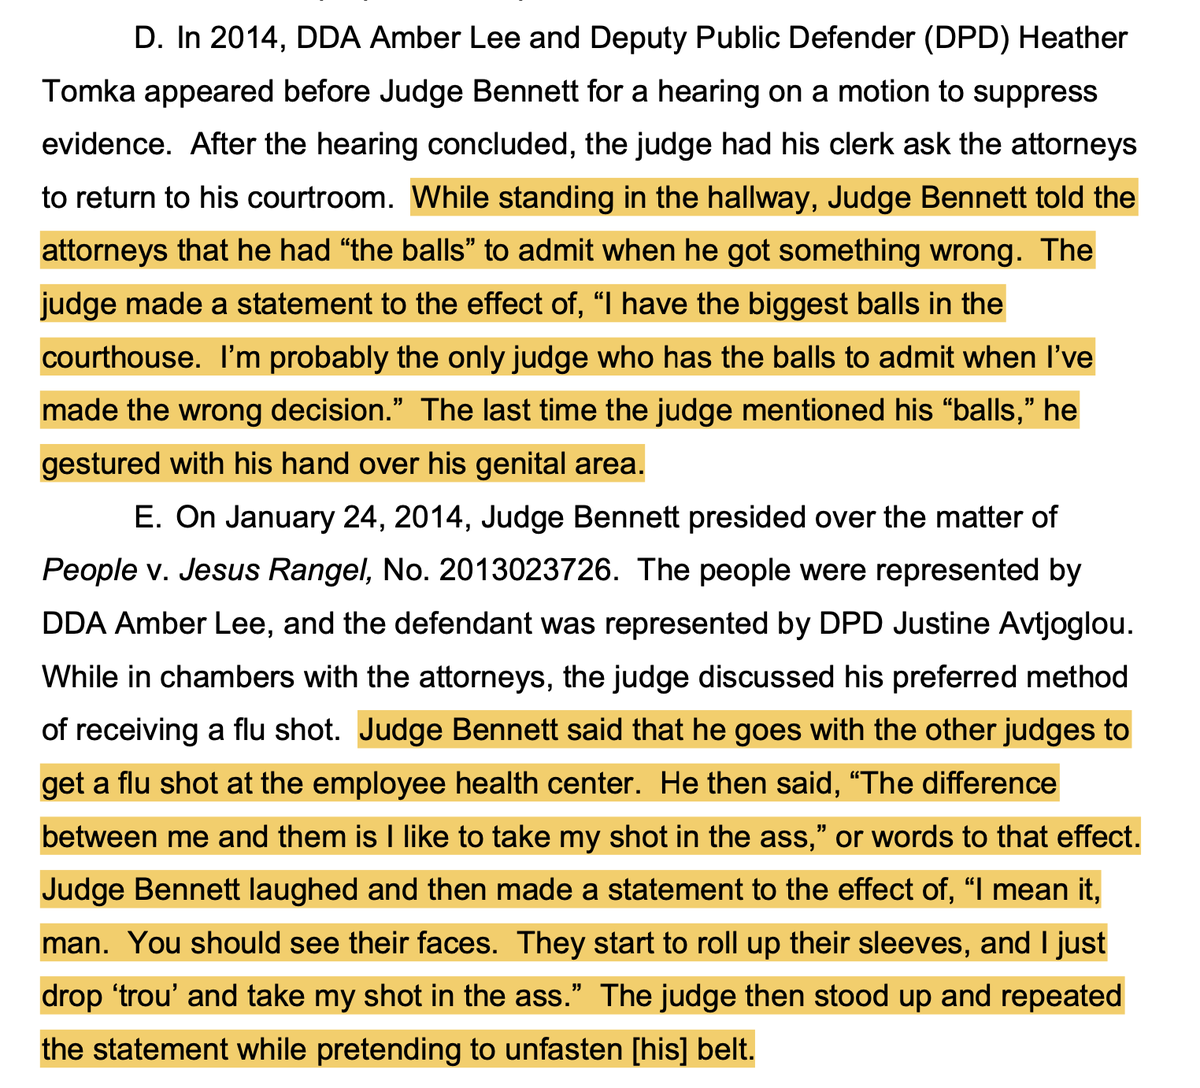 5/ This judge is REALLY into his balls.